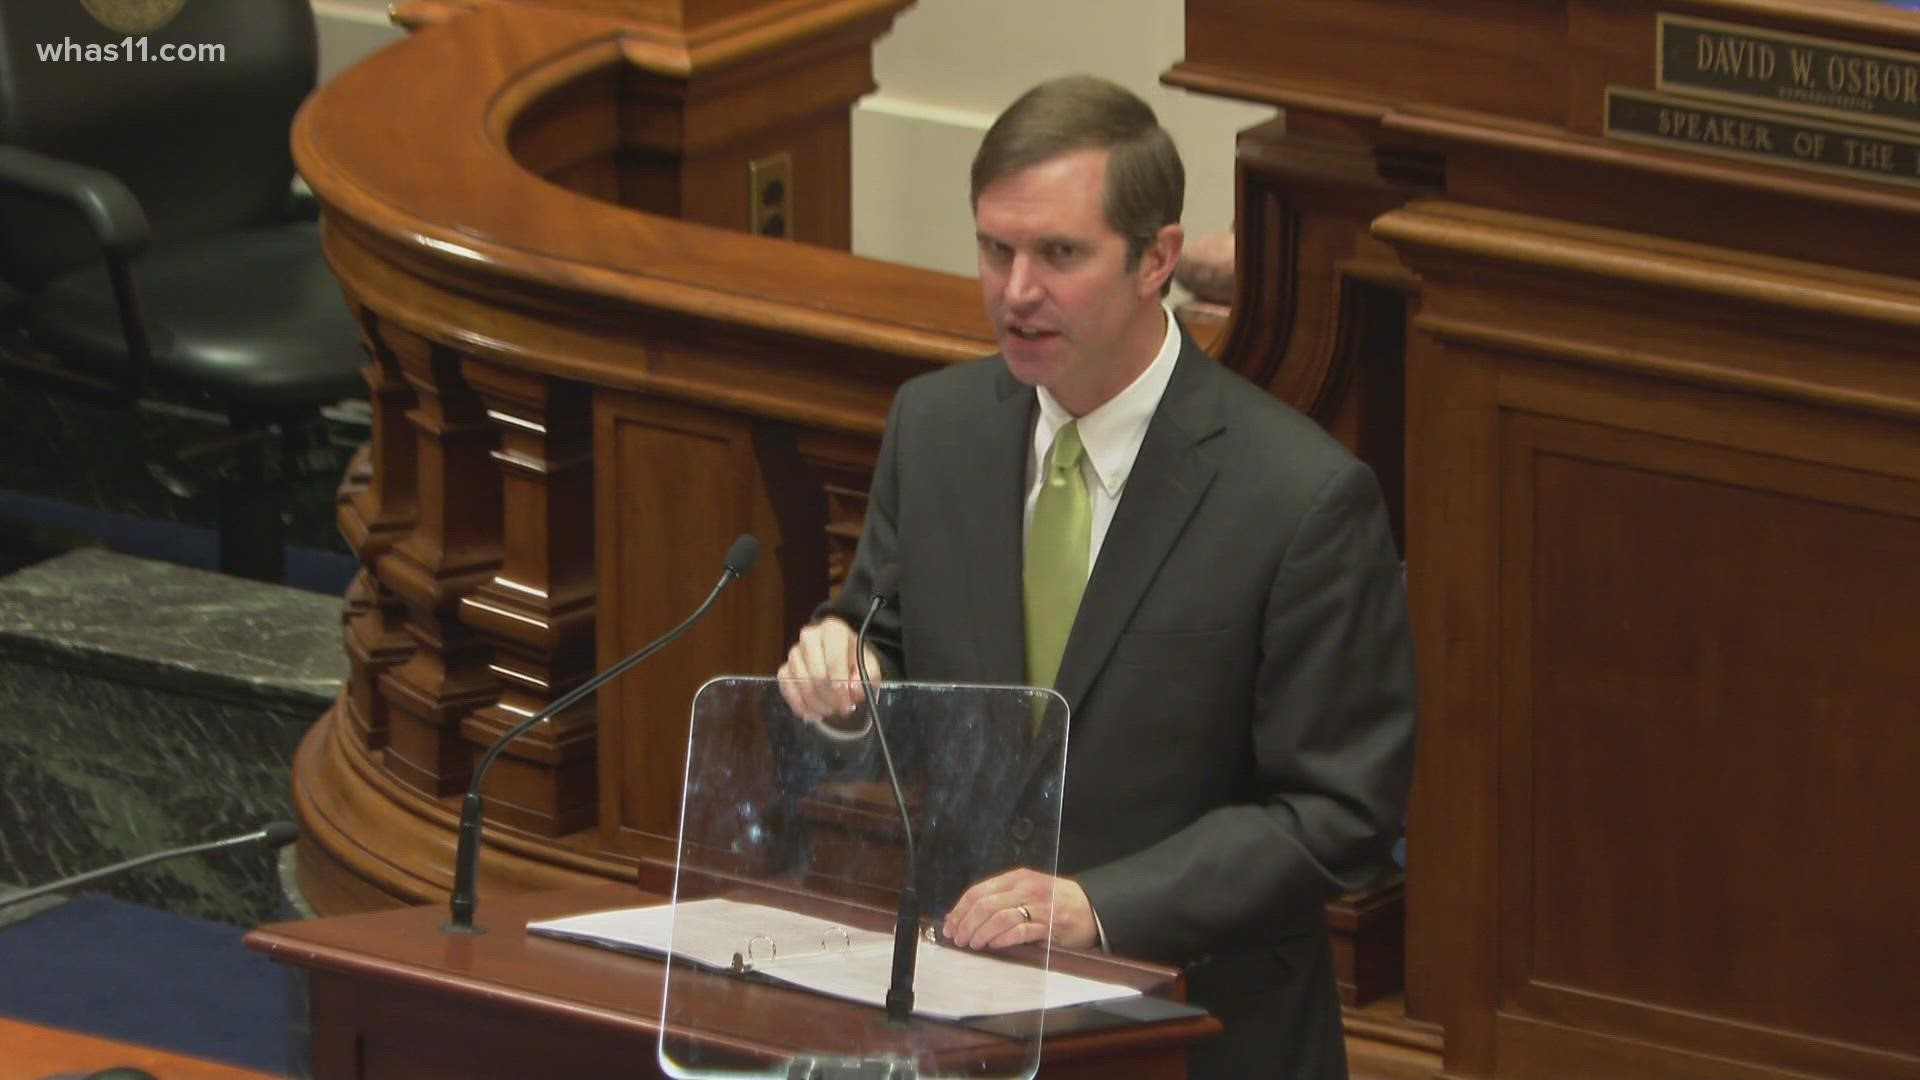 After Beshear's address Republican leaders said they need more time to digest the budget before making detailed comments.